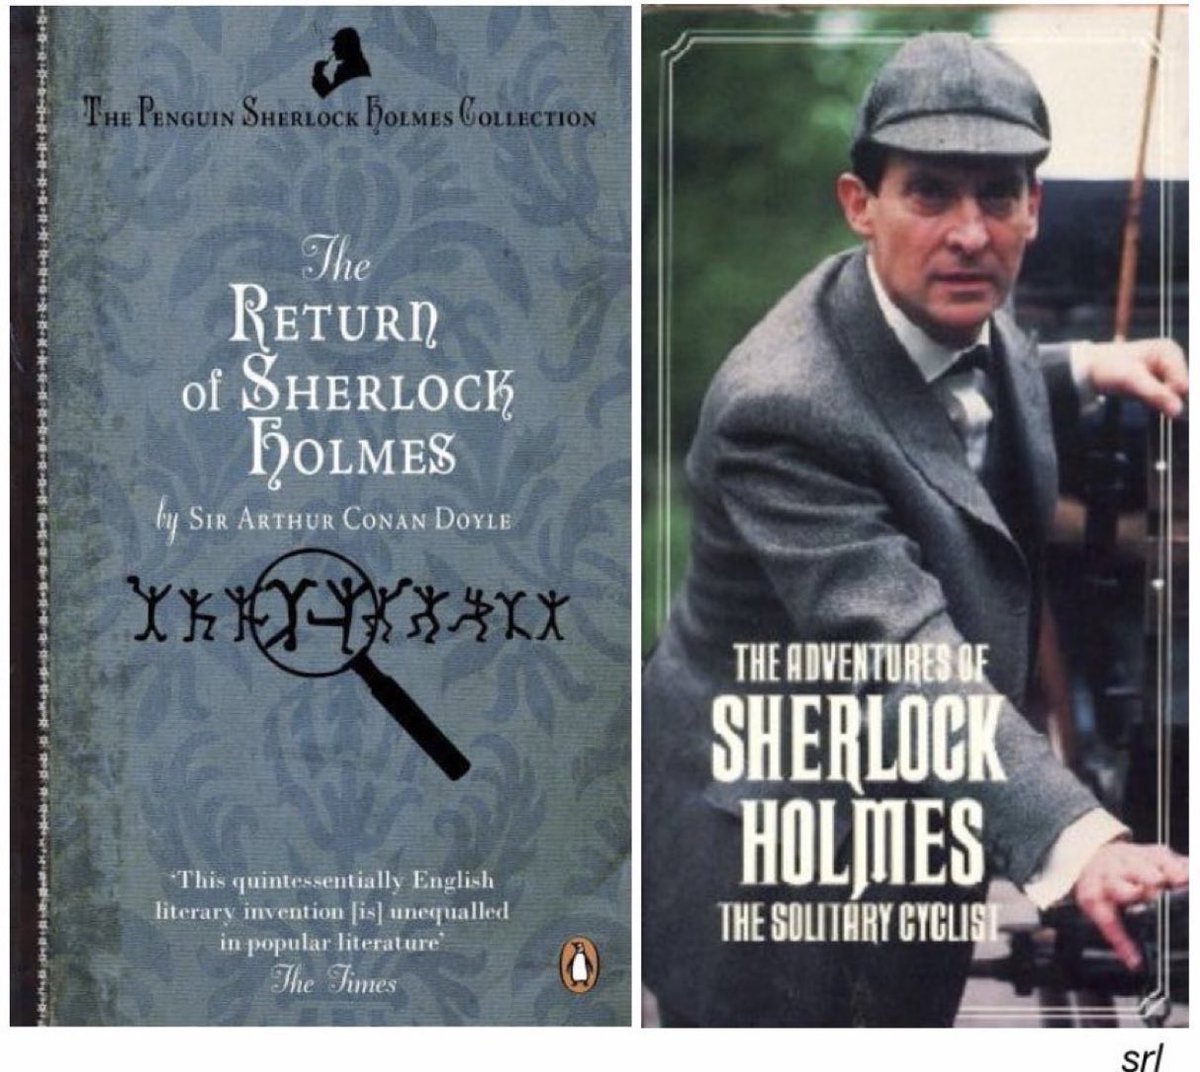 12:25pm TODAY on @ITV4

From 1984, s1 Ep 4 of “The Adventures of Sherlock Holmes” - “The Solitary Cyclist” directed by #PaulAnnett & written by #AlanPlater

Based on #SirArthurConanDoyle’s 1903 short story📖 'The Adventure of the Solitary Cyclist'

🌟#JeremyBrett #DavidBurke